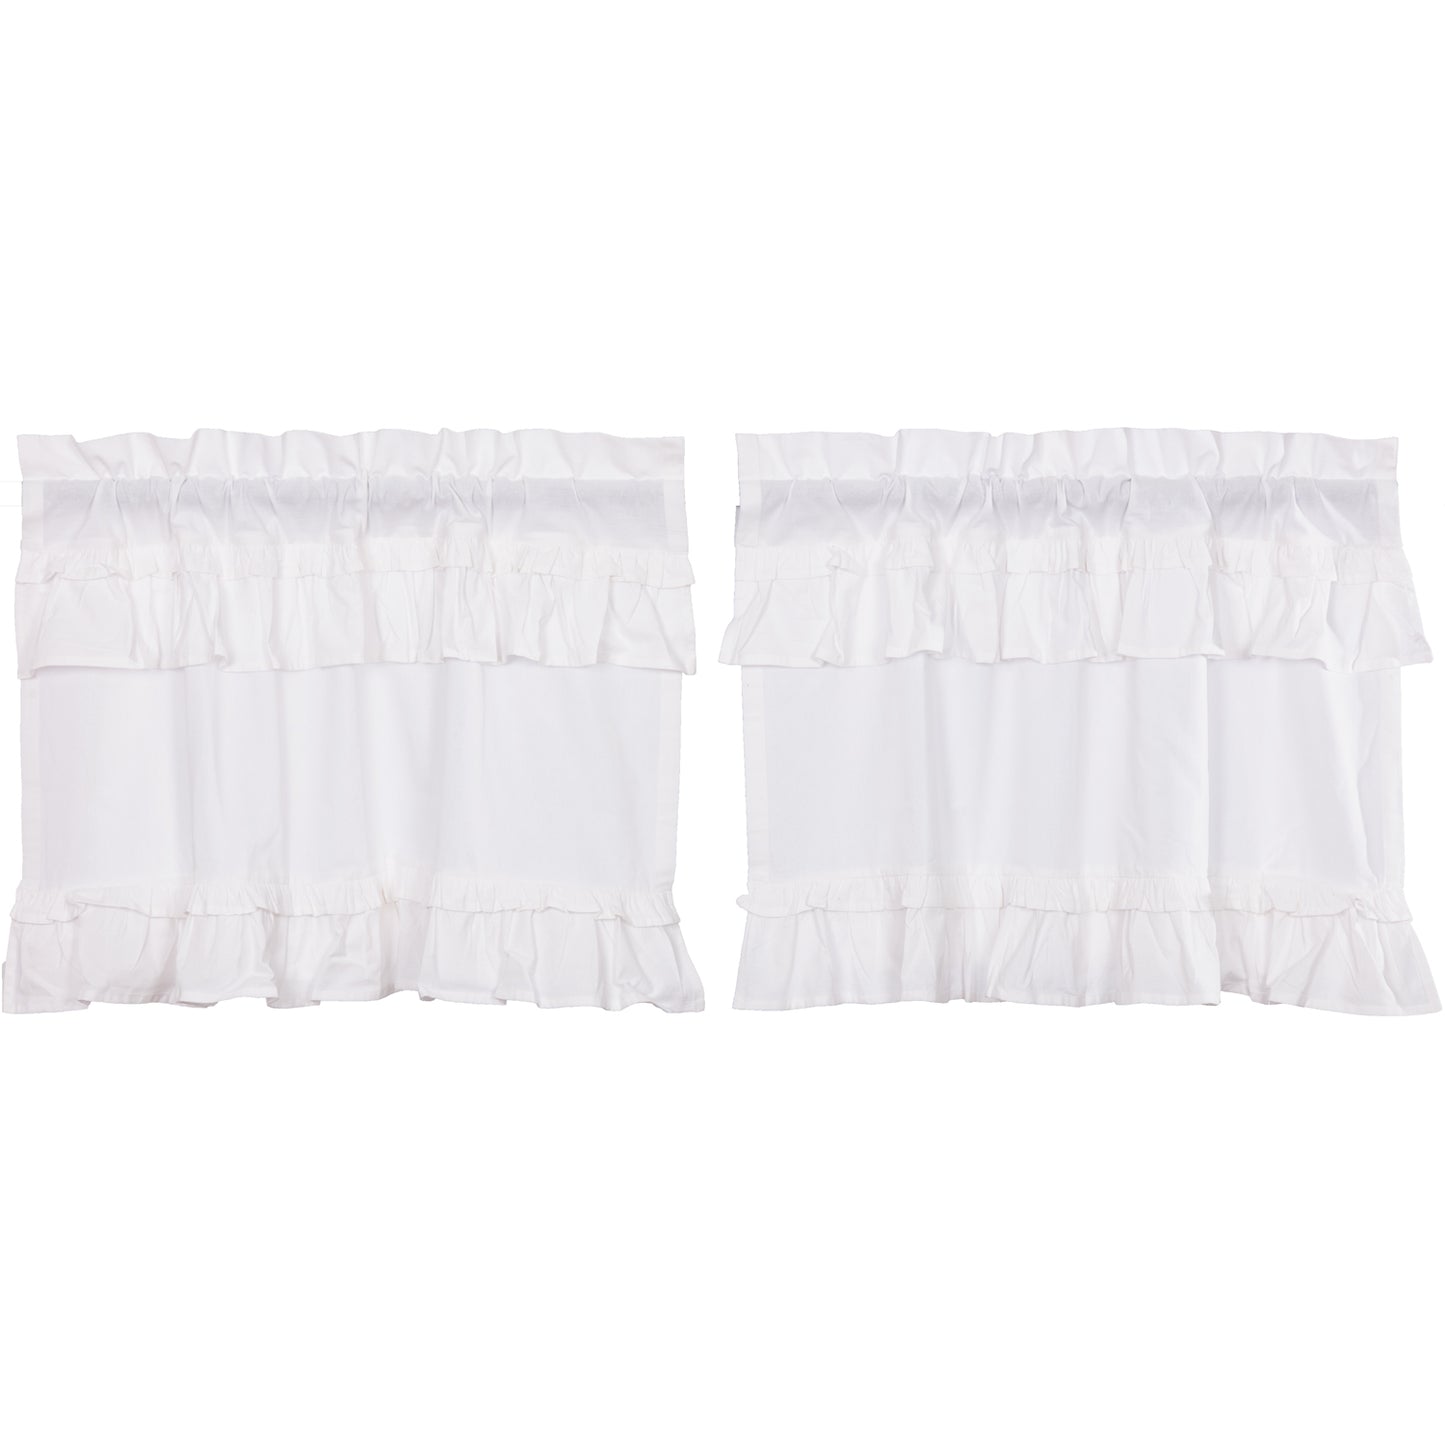 51993-Muslin-Ruffled-Bleached-White-Tier-Set-of-2-L24xW36-image-6